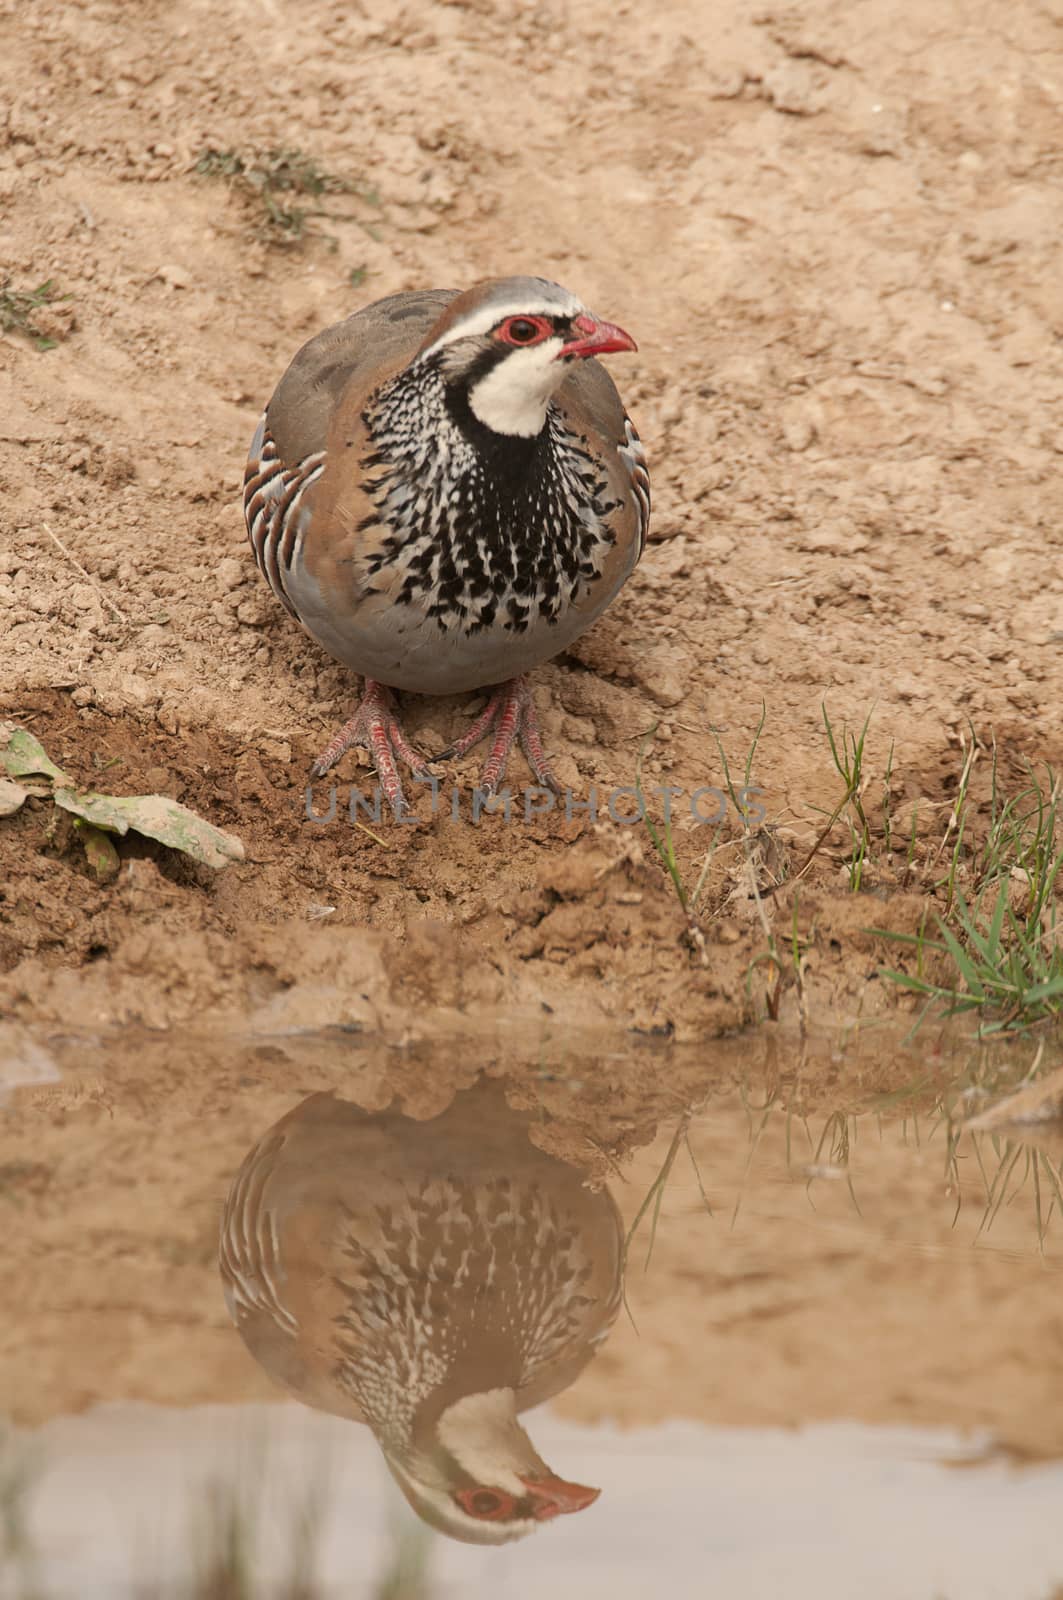 The red-legged, Alectoris rufa, drinking water by jalonsohu@gmail.com